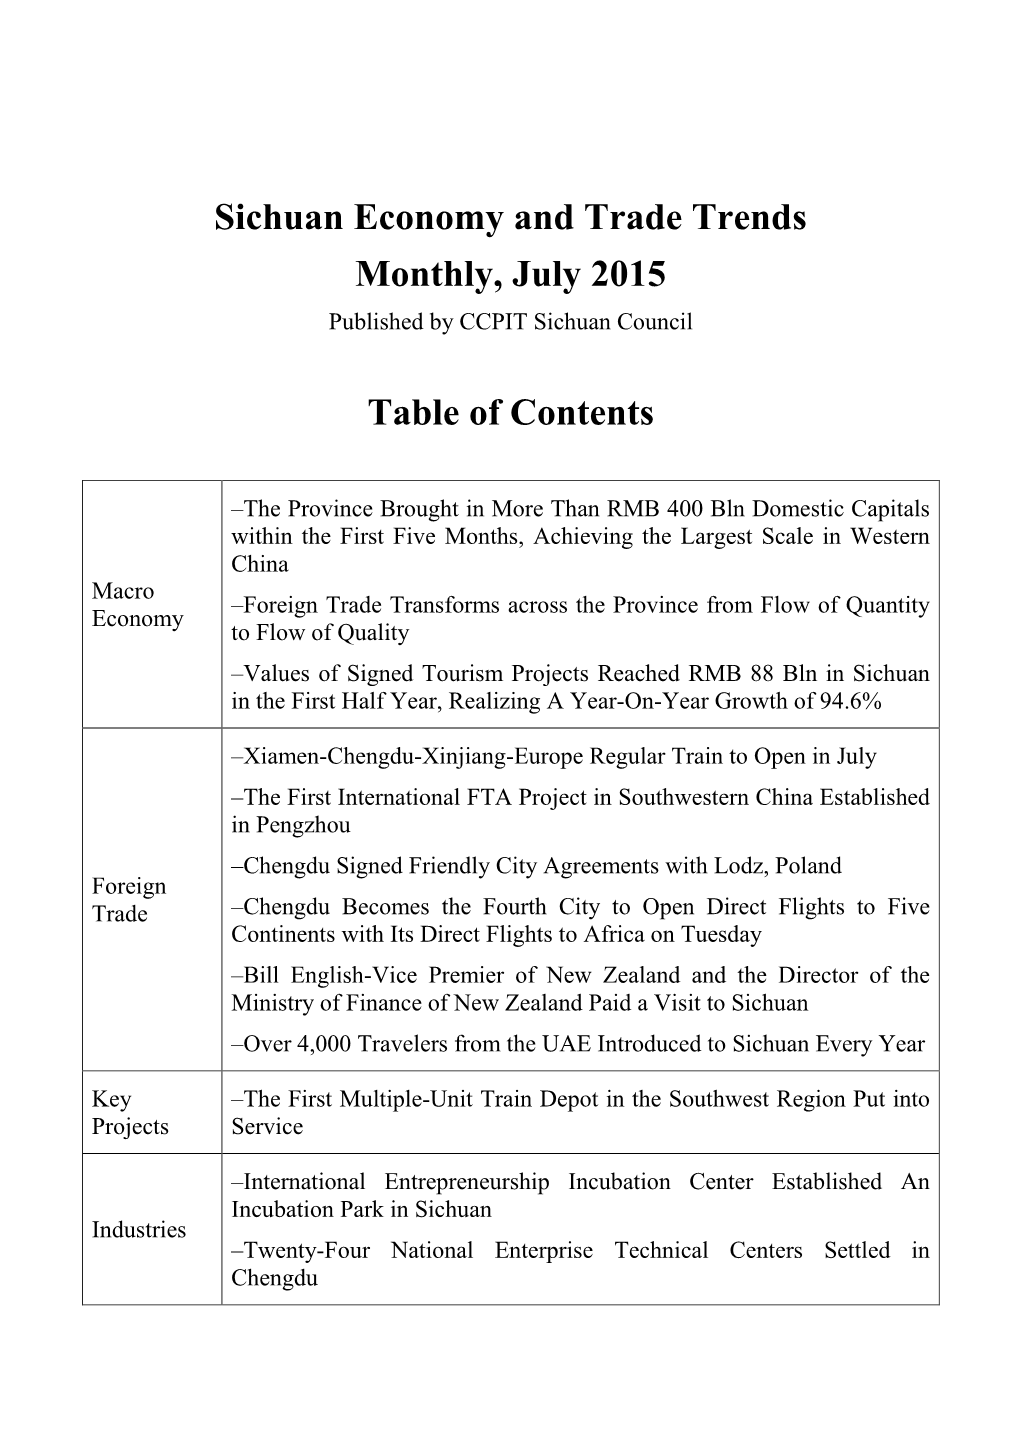 Sichuan Economy and Trade Trends Monthly, July 2015 Table of Contents